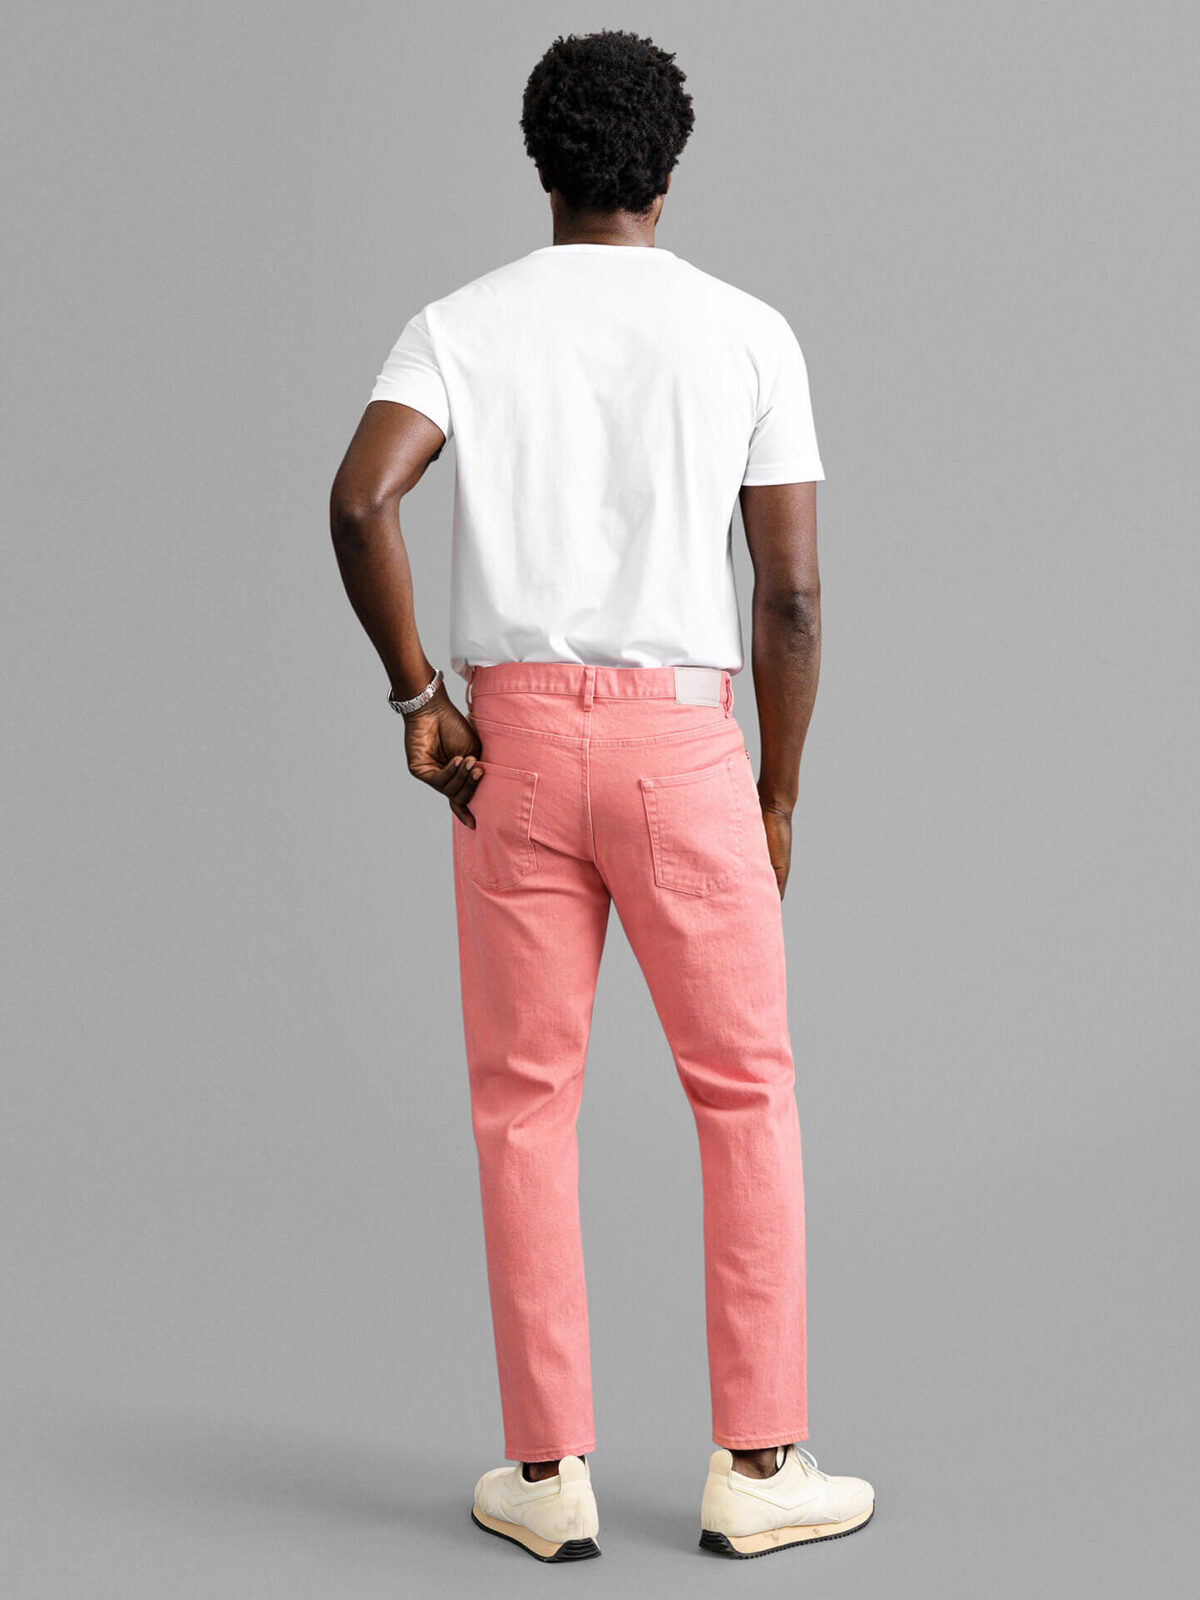  Men's Jeans Men Flap Pocket Side Cargo Jeans Jeans for Men  (Color : Baby Pink, Size : X-Large) : Clothing, Shoes & Jewelry